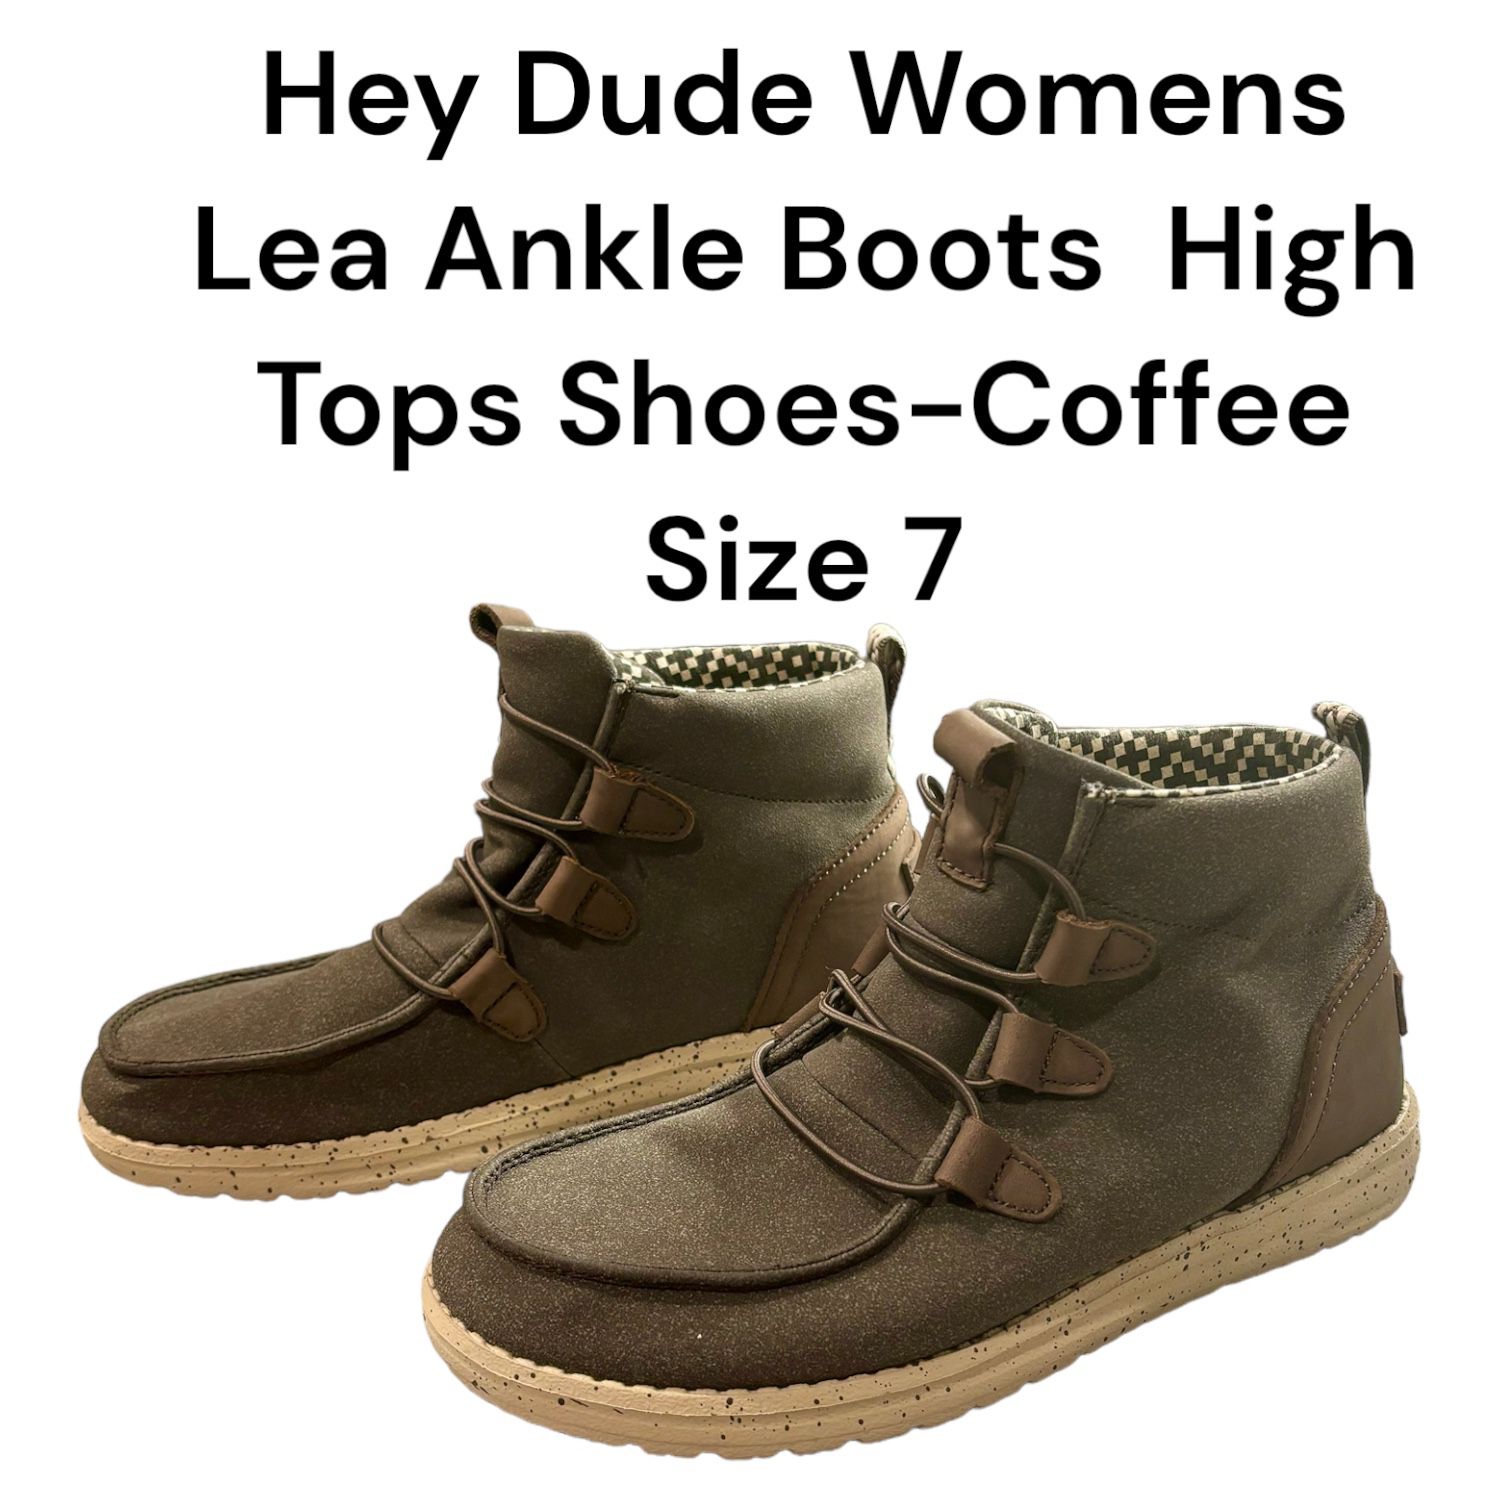 Hey Dude Womens Size 7 Lea Ankle Boots  High Tops Shoes-Coffee